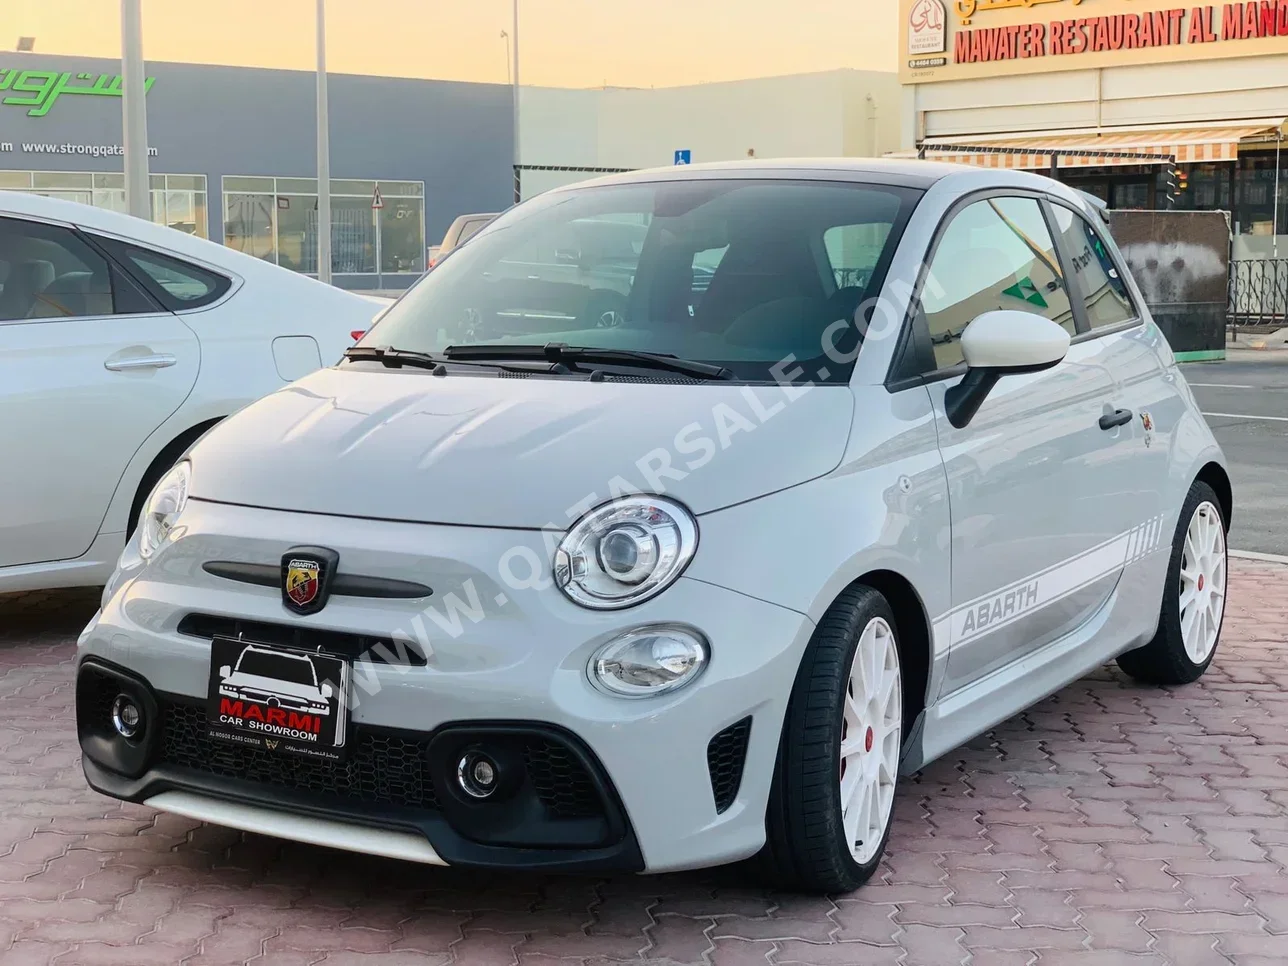 Fiat  695  Abarth  2022  Automatic  13,000 Km  4 Cylinder  Front Wheel Drive (FWD)  Hatchback  Light Sky Blue  With Warranty